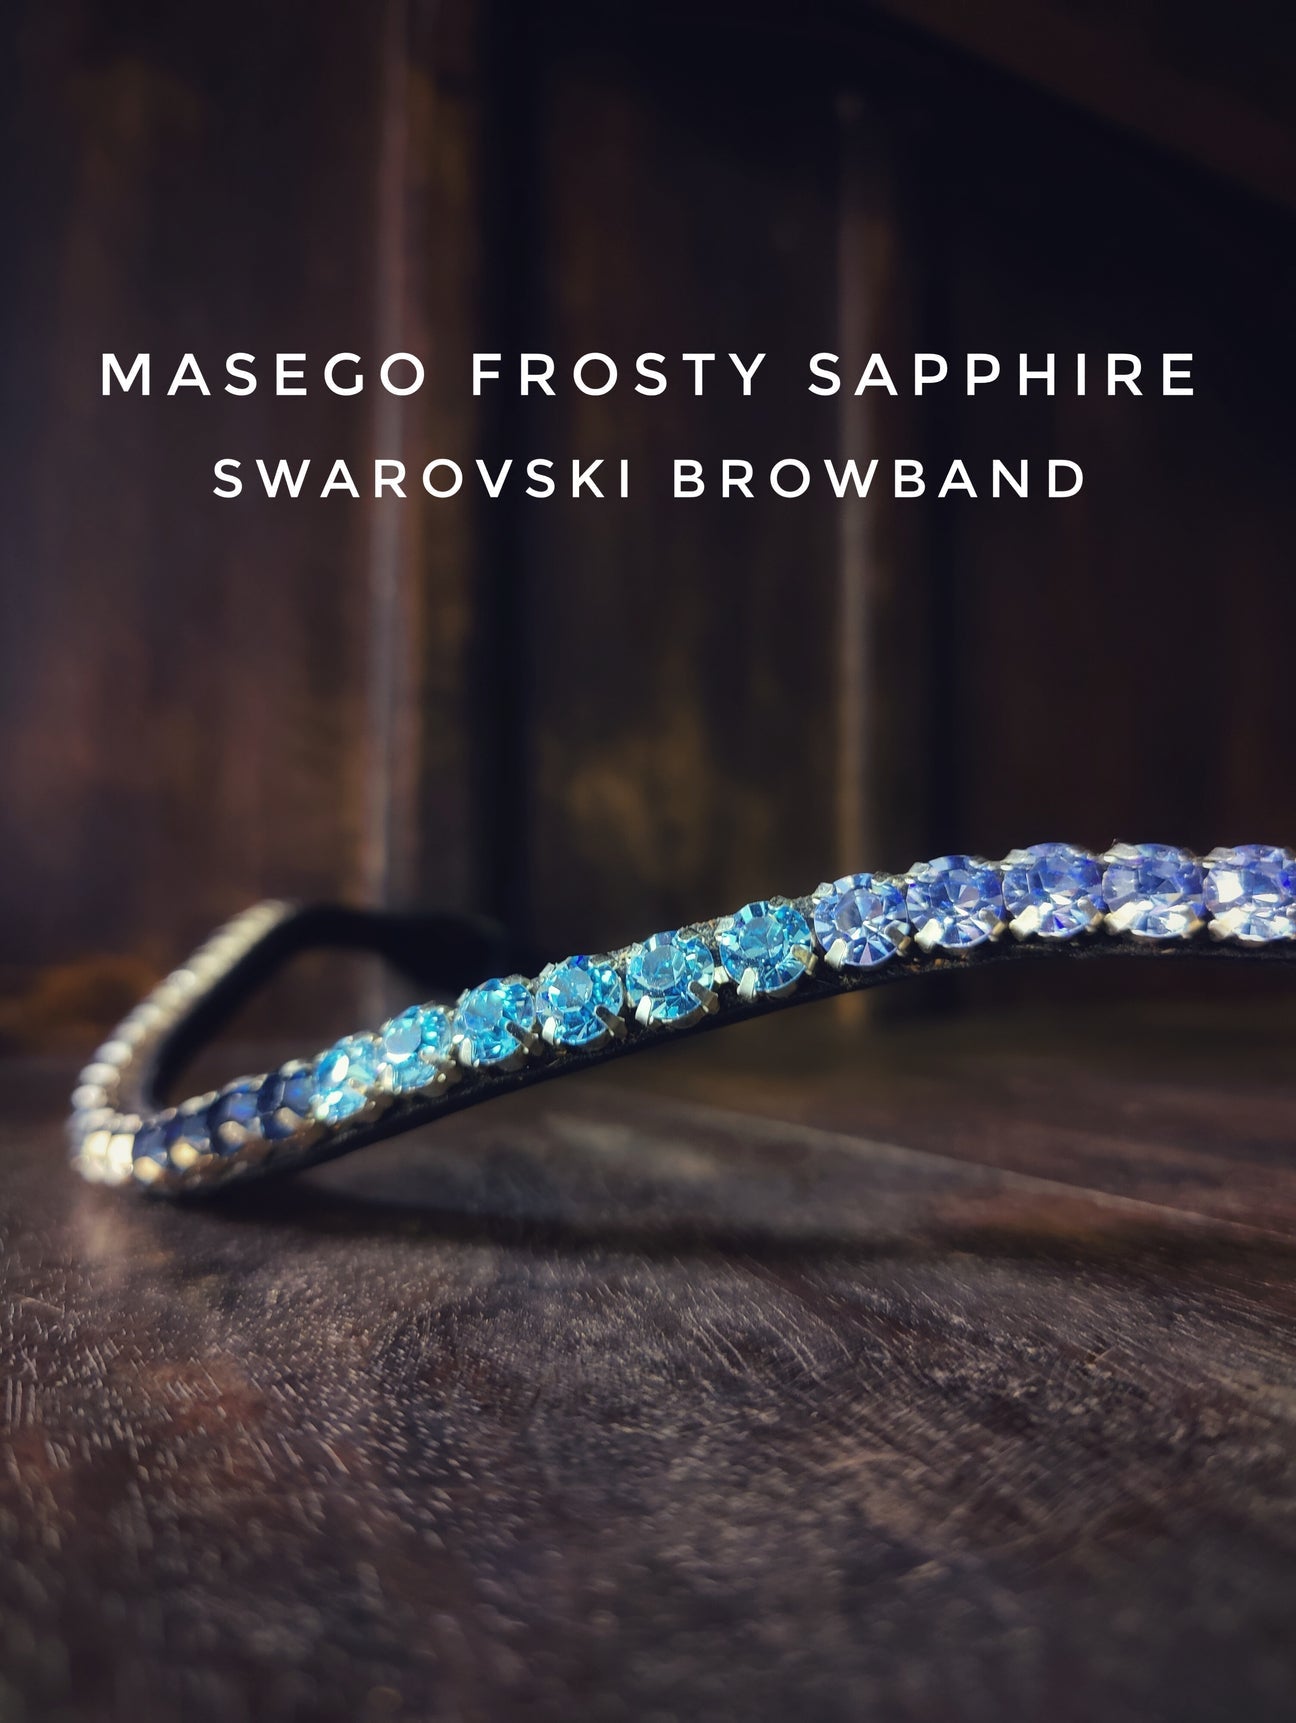 Swarovski Browband "Frosty Sapphire" Brown FULL - In Stock in AUS